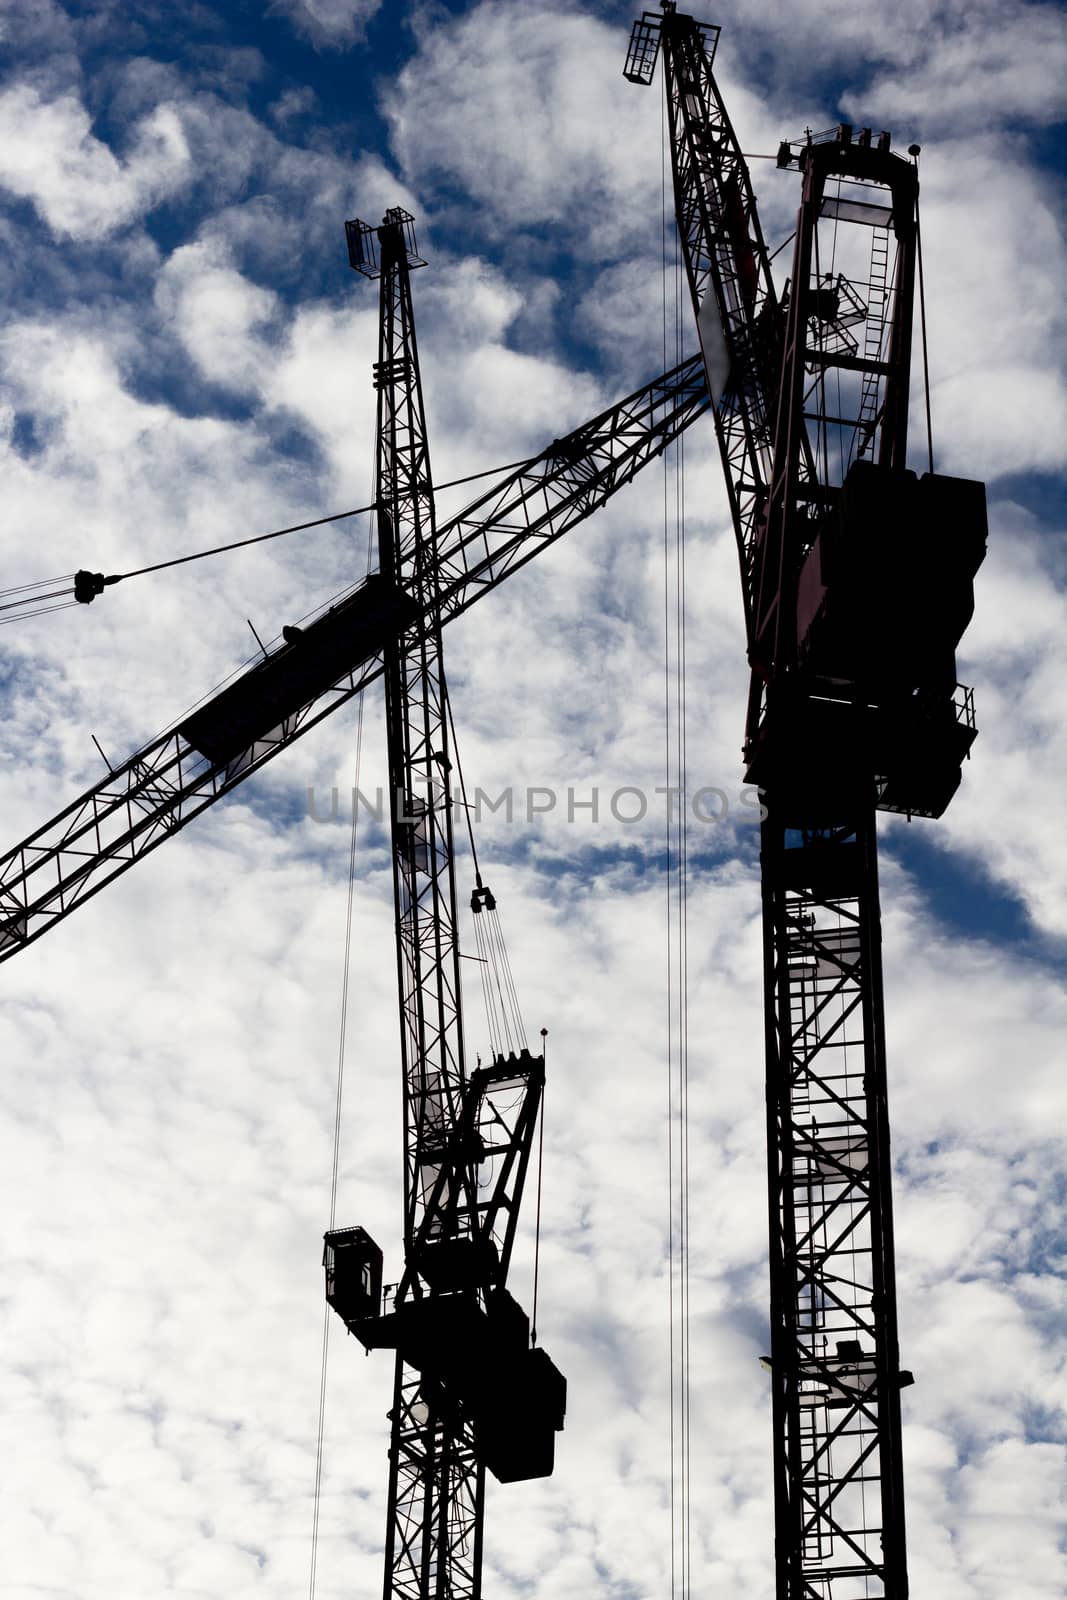 Three tower cranes silhouetted against a cloud filled sky